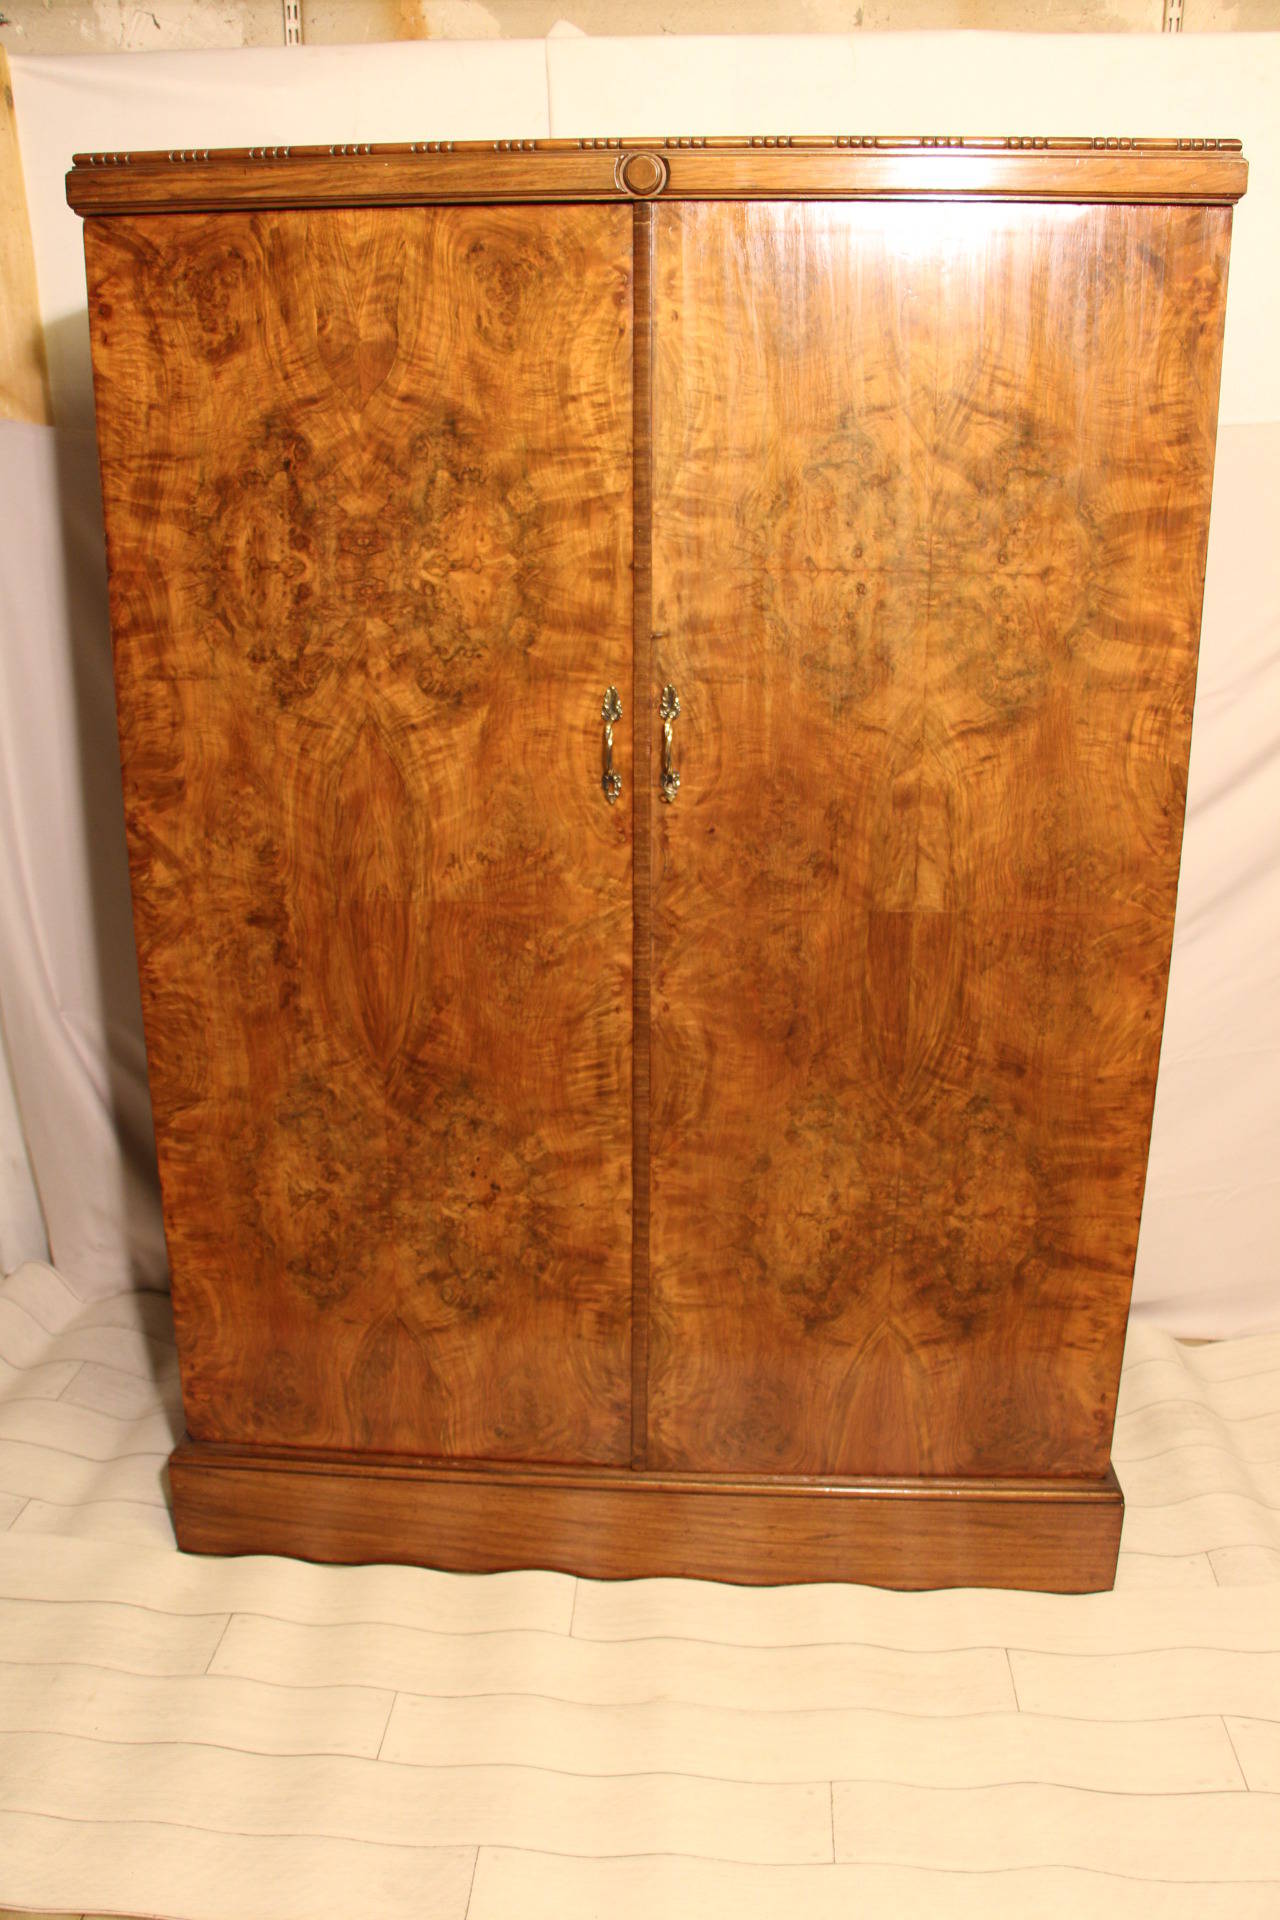 Early 20th Century 1930s Burled Walnut Compactom Steamer Trunk